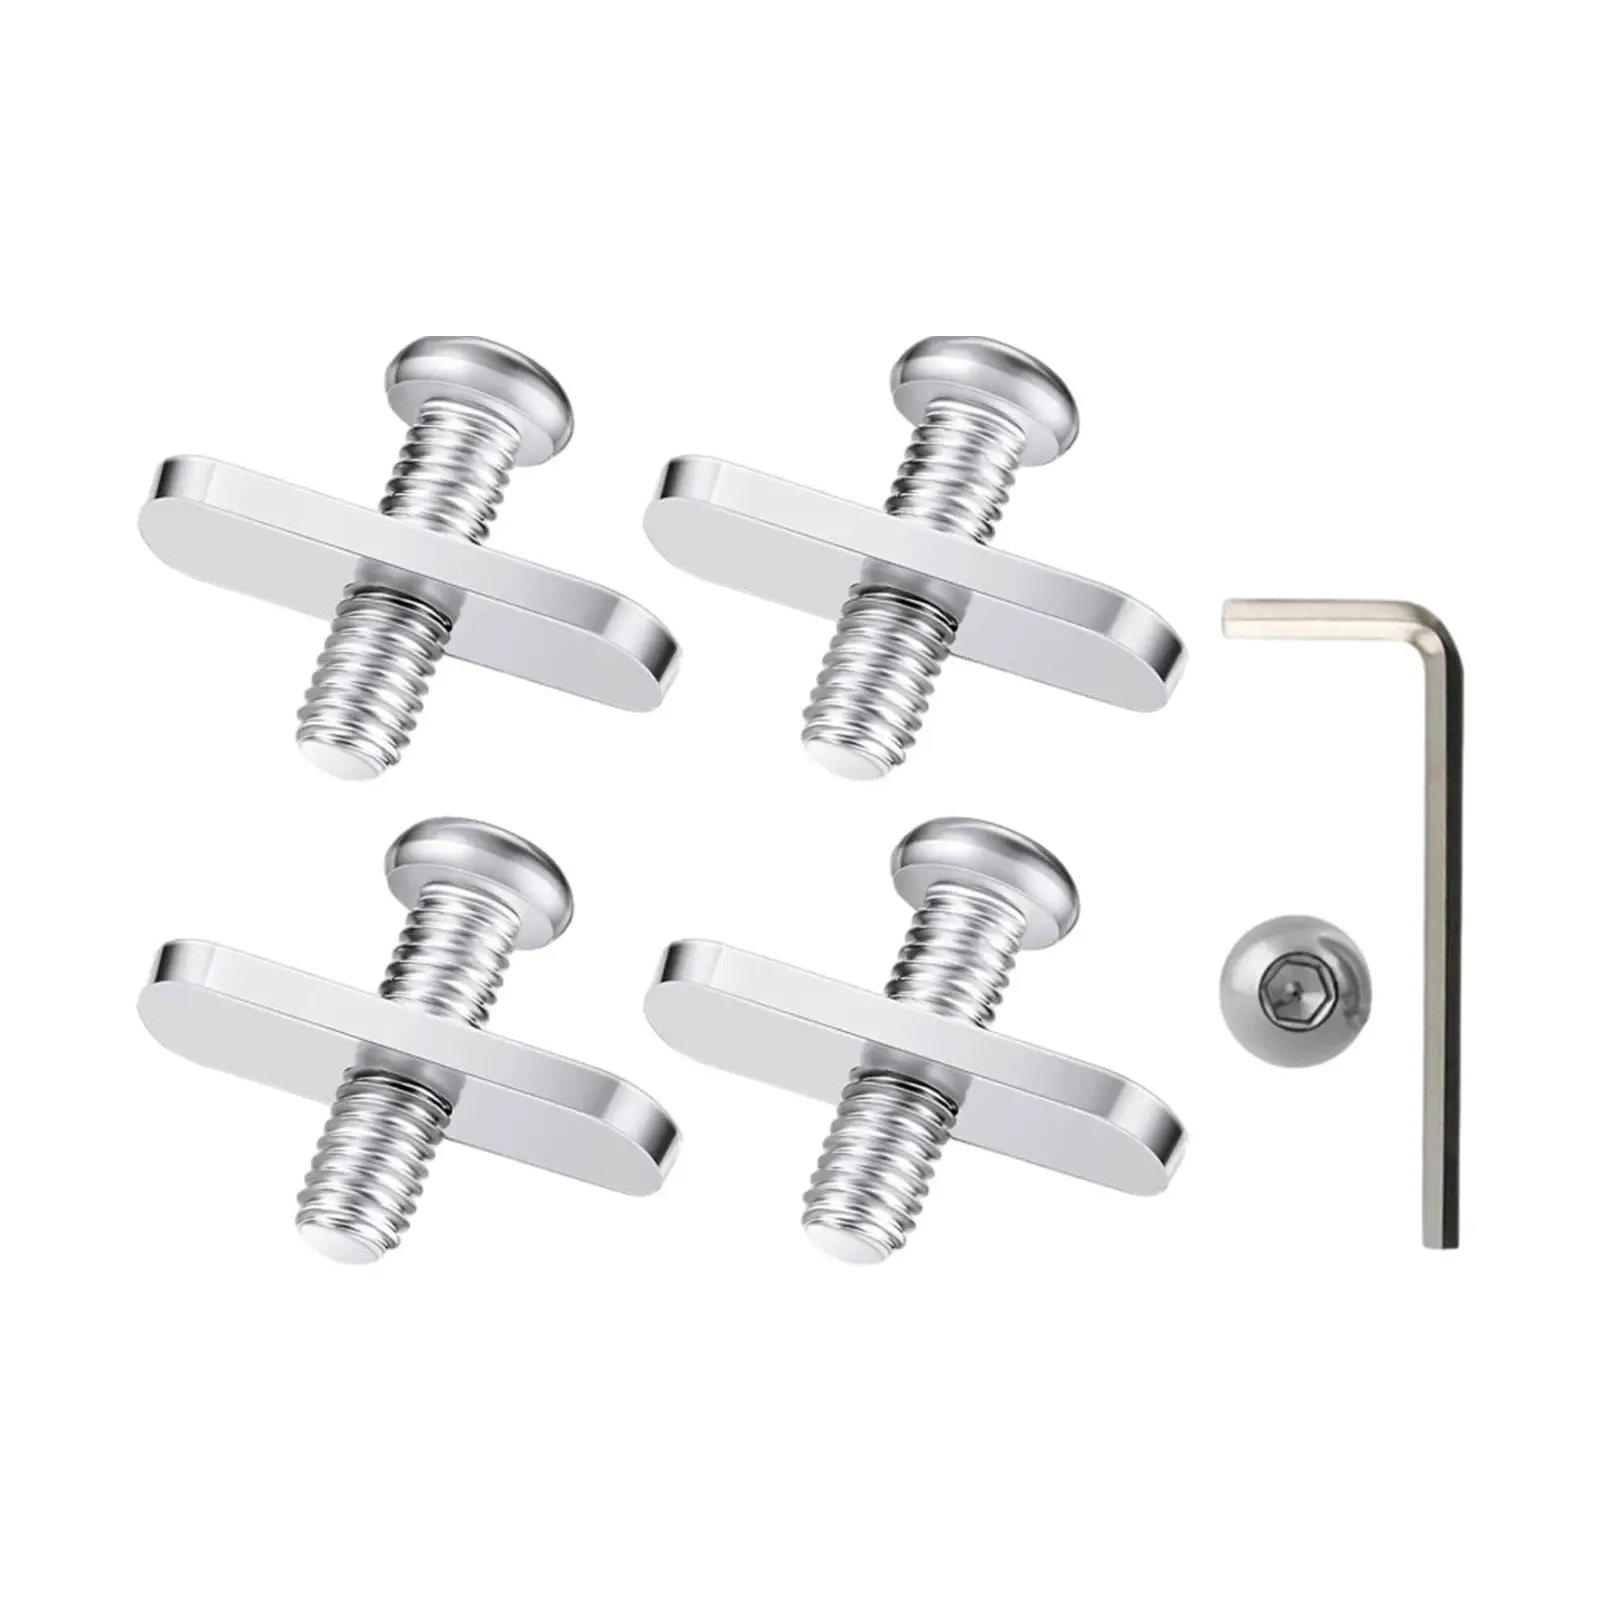 Kayak Rail Track Screw Nuts, Stainless Steel Outdoor Parts Tool Hardware Gear Rail Mounting Replacement Set for Kayak Rail